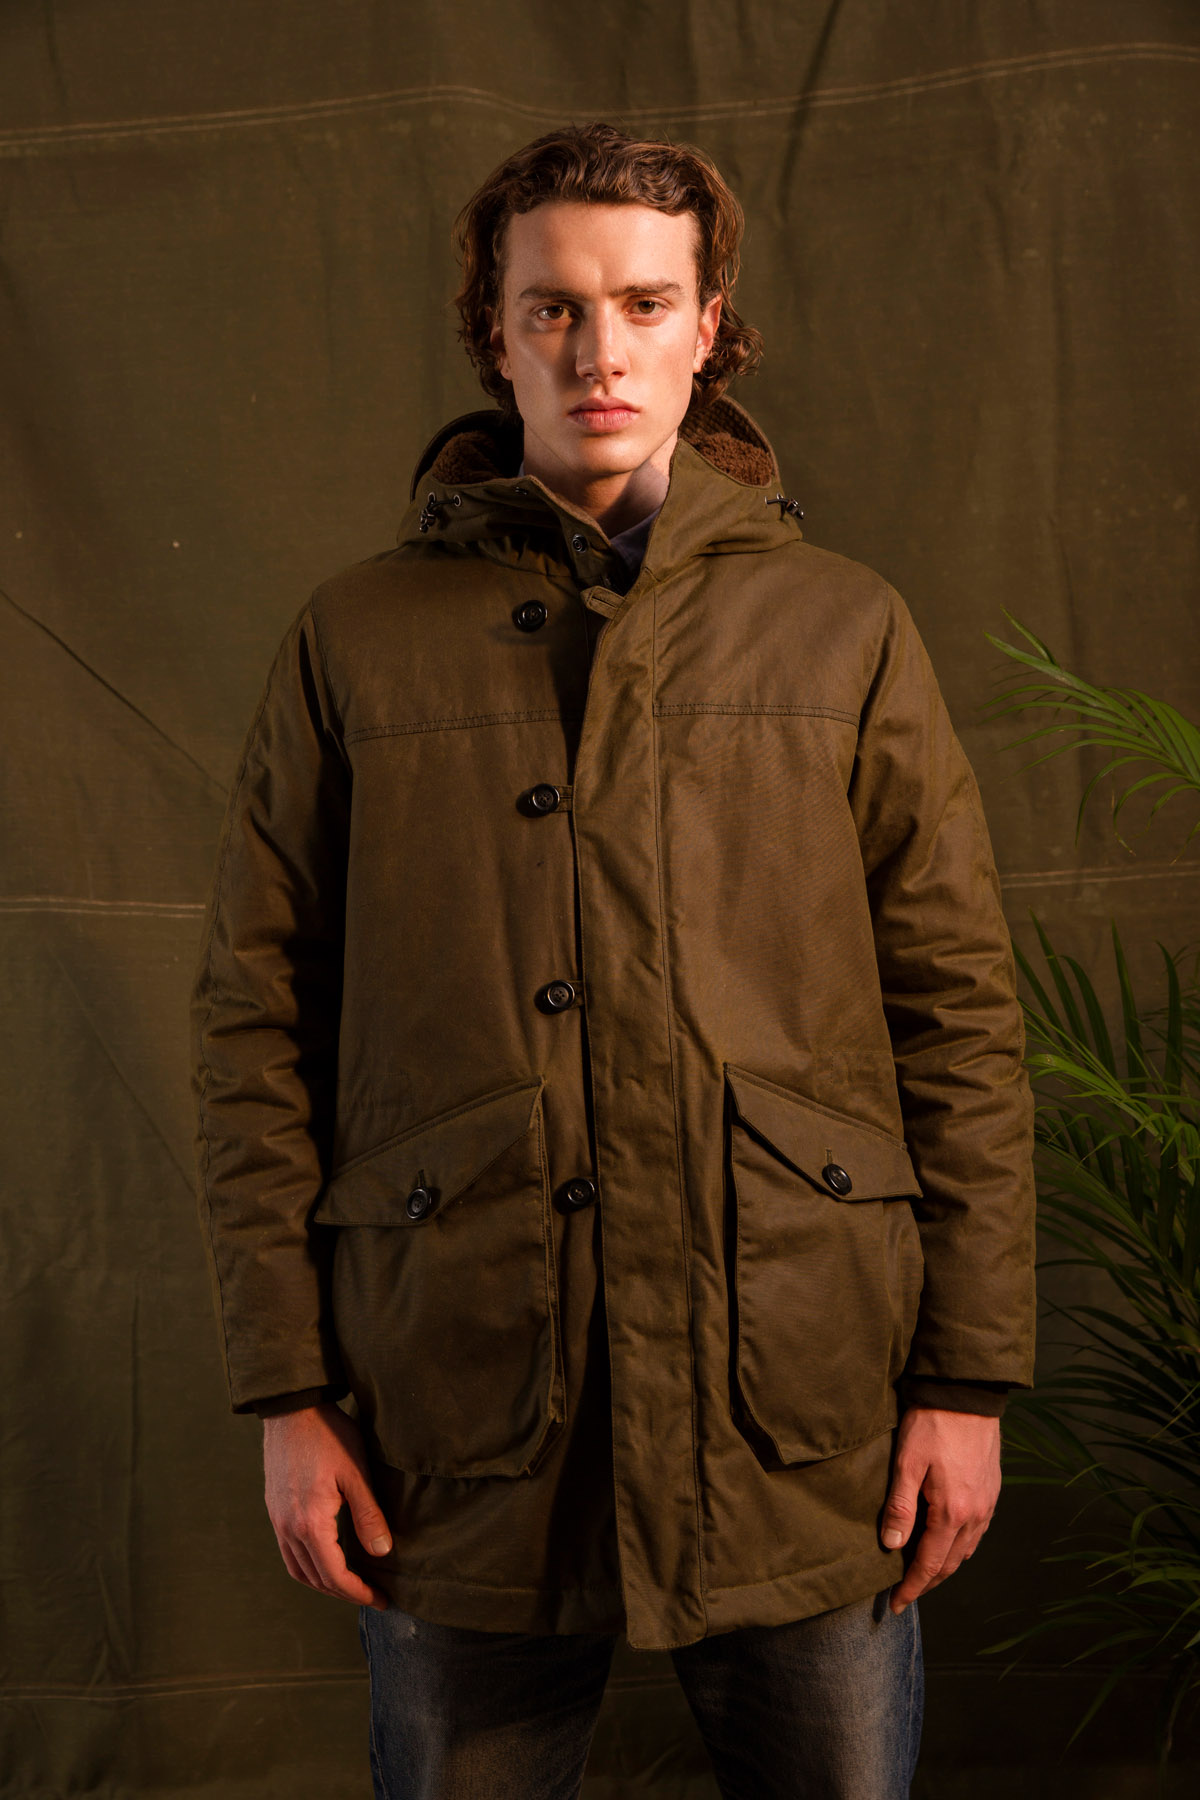 Baracuta’s FW21 Collection Strengthens Its Subcultural Legacy